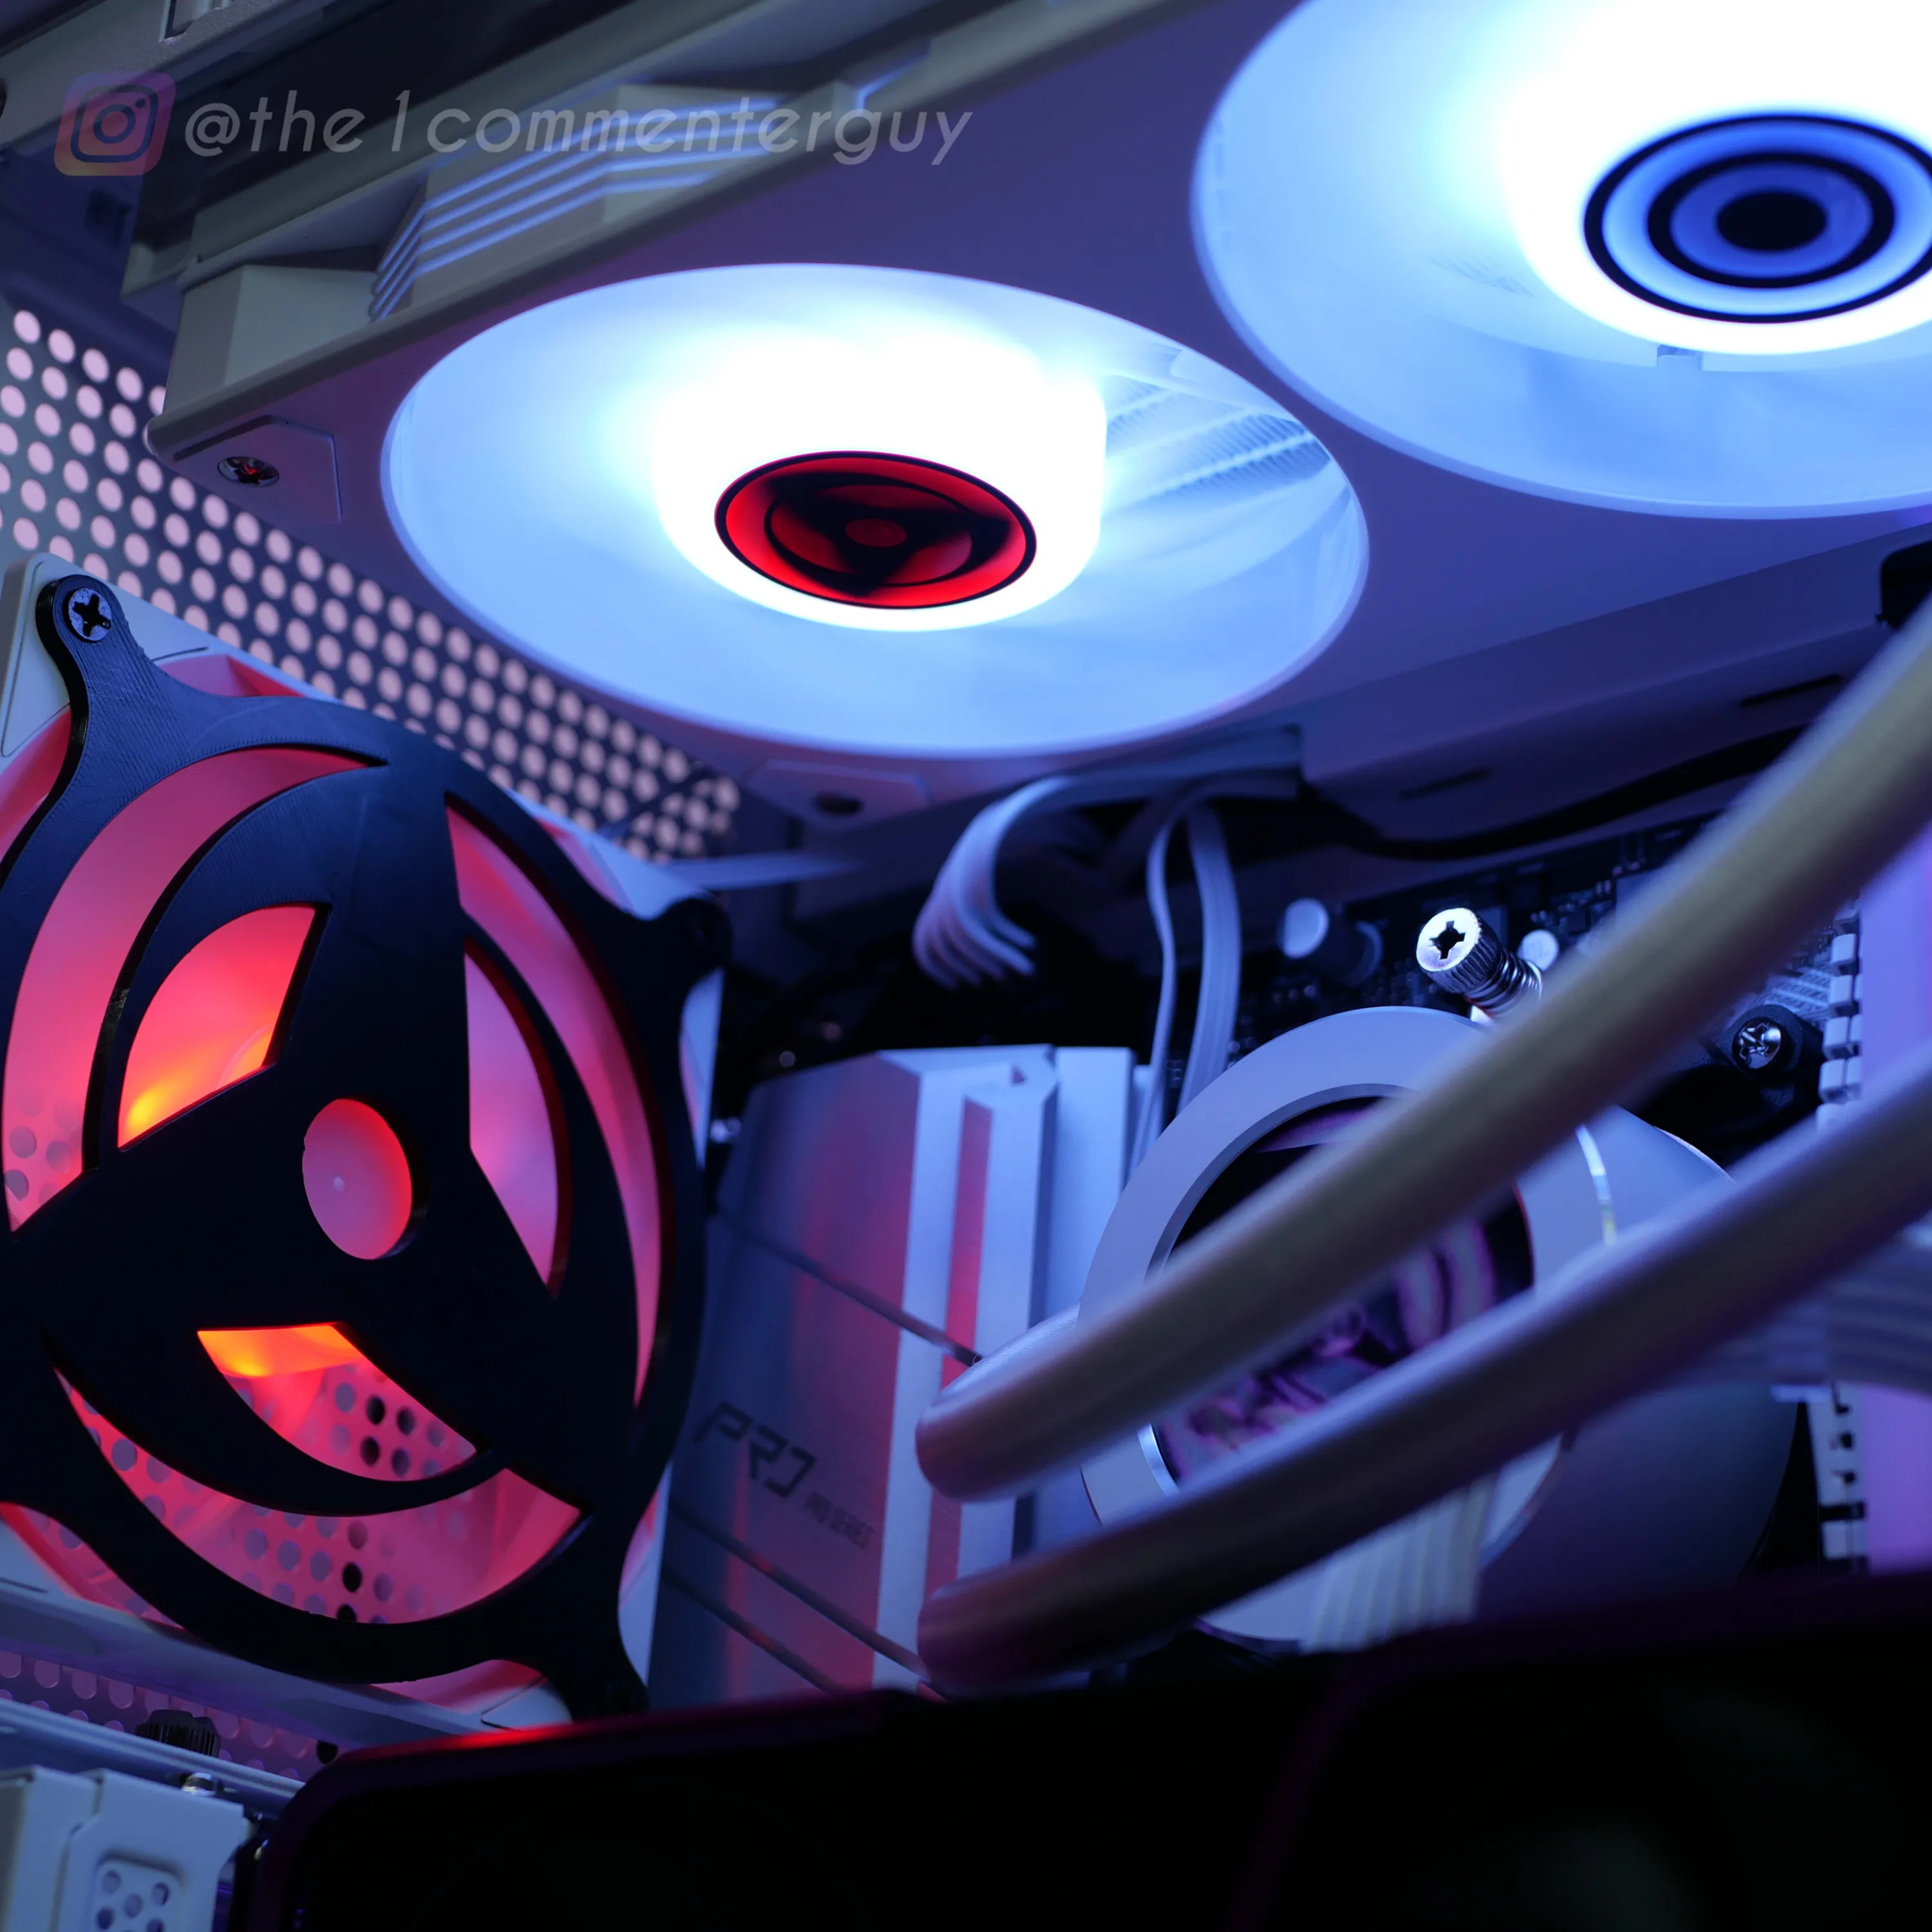 Obito theme PC build RESERVED COMMISSION